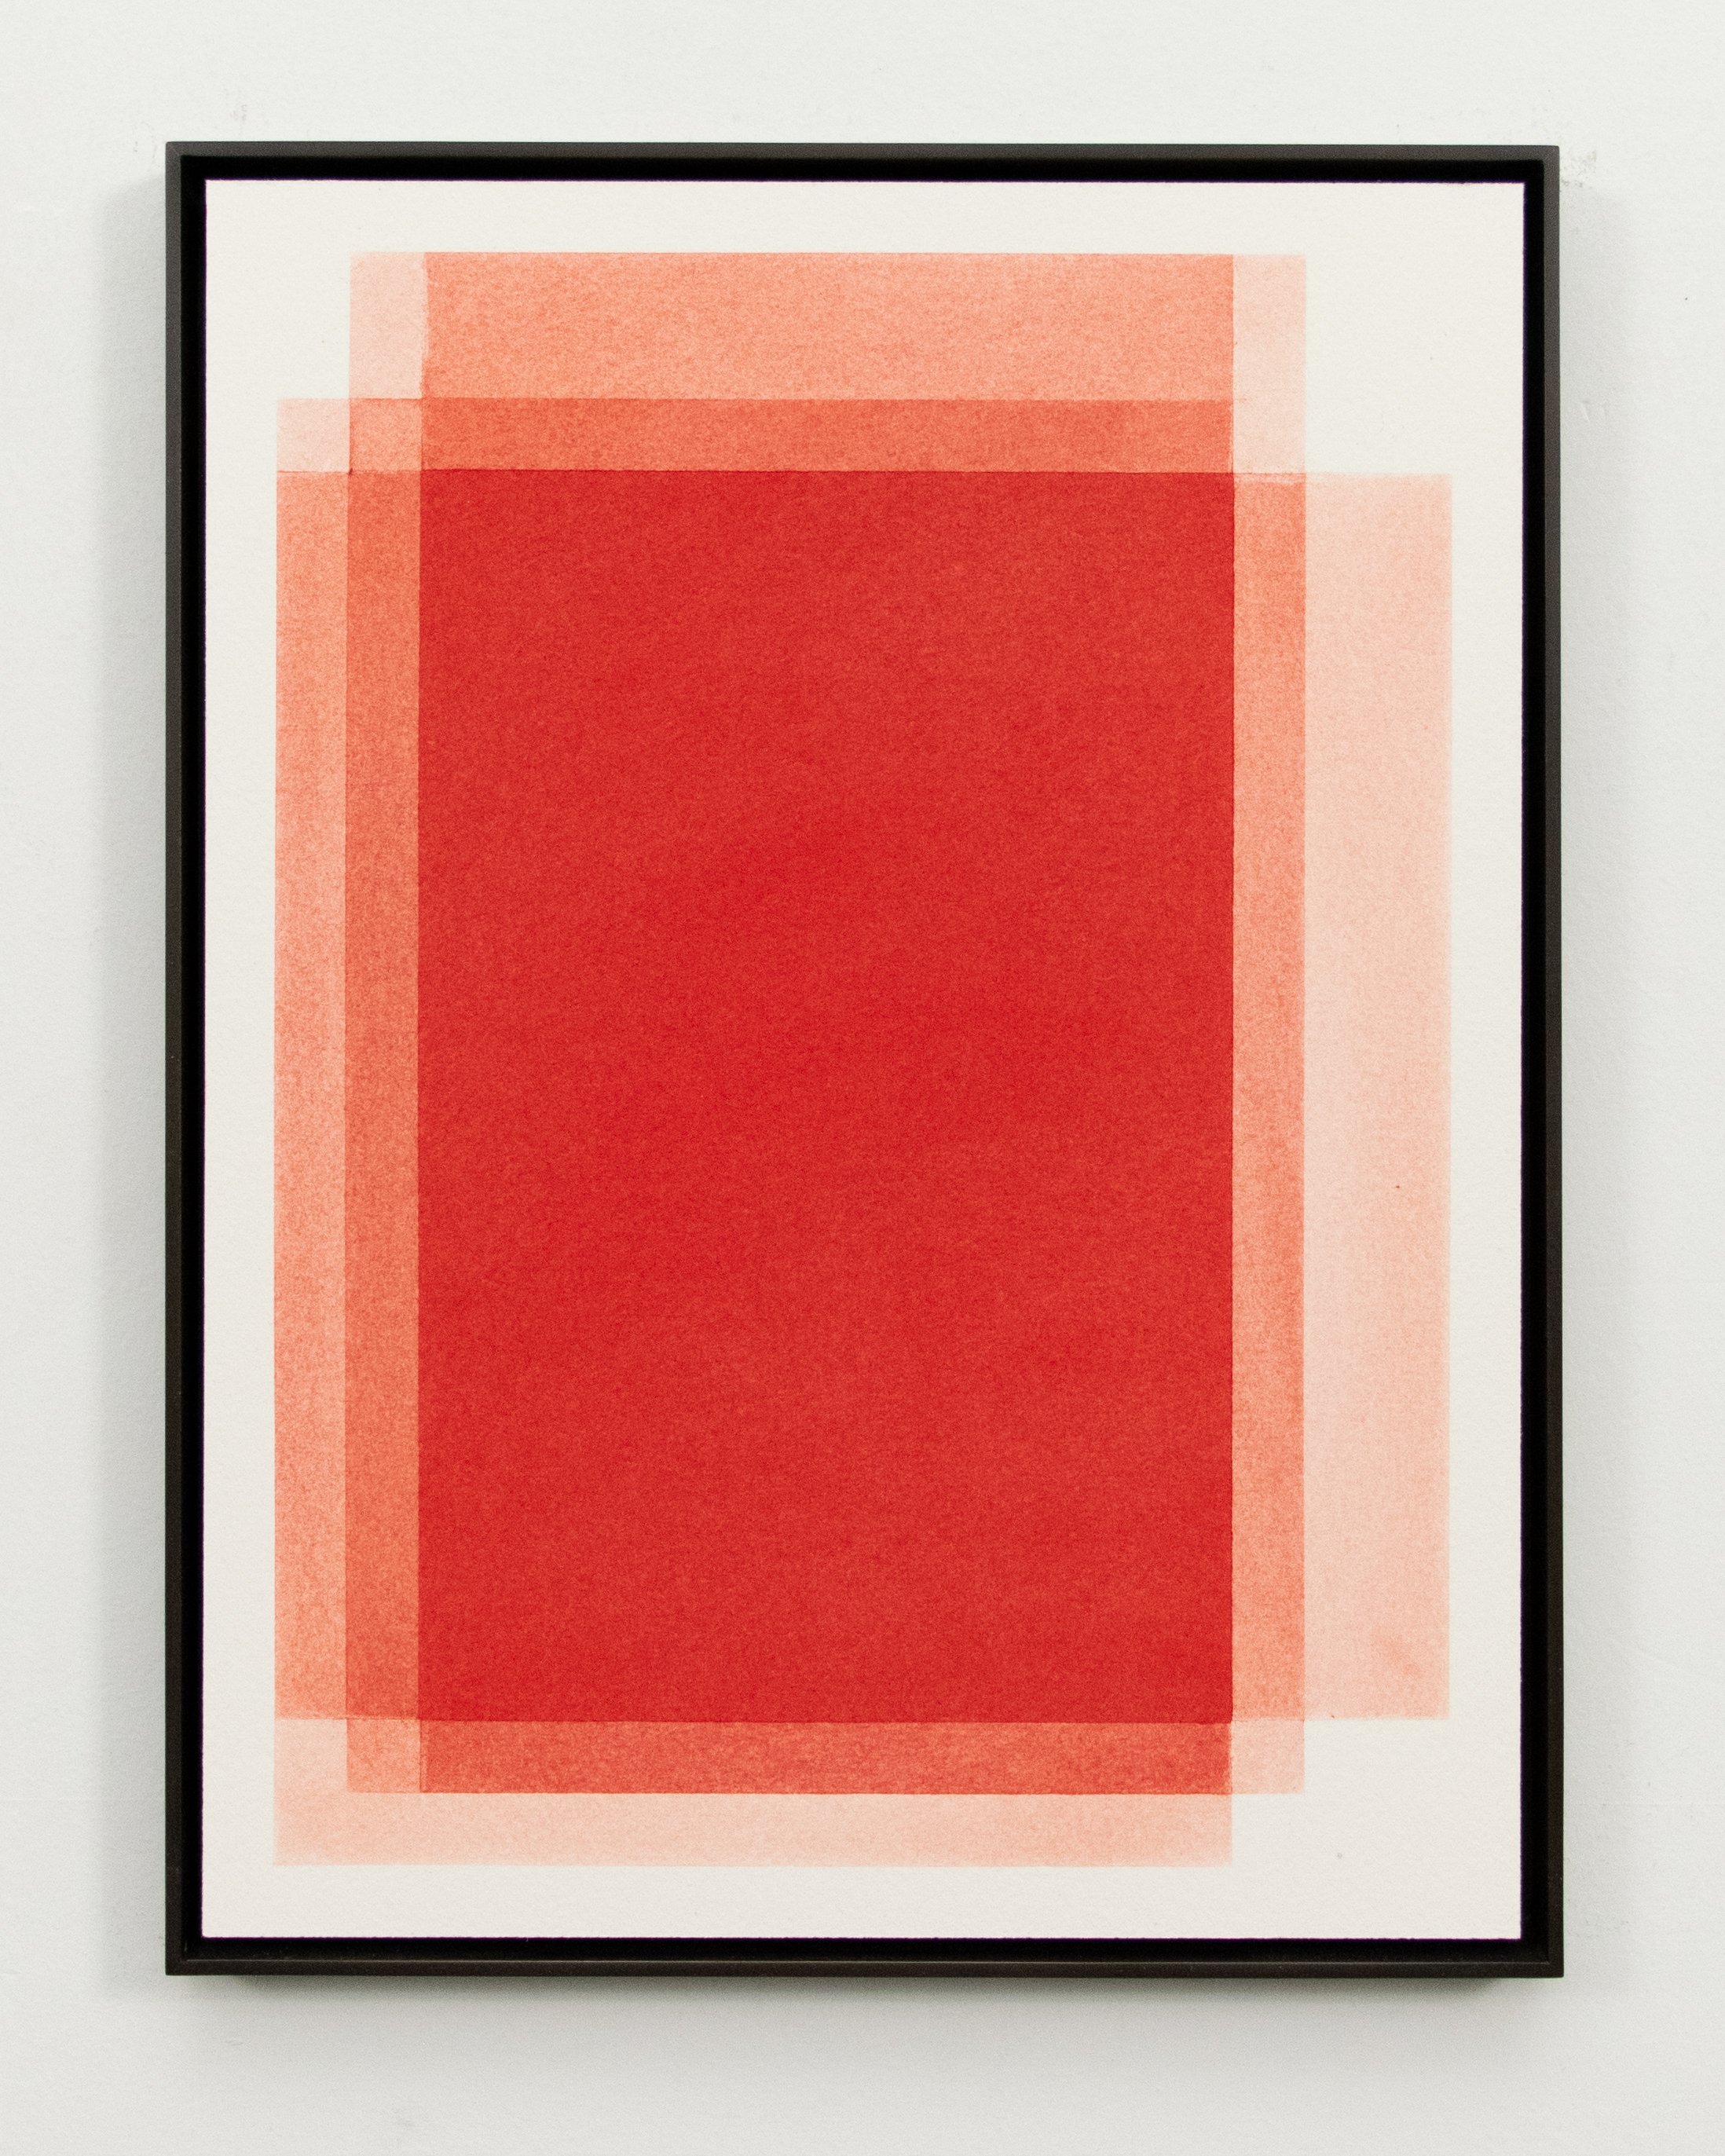  Stephen Somple  20 6 13 3 Red , 2022 Graphite and pigment on paper with oxidized brass frame 9.5" x 12.5" x .5" 